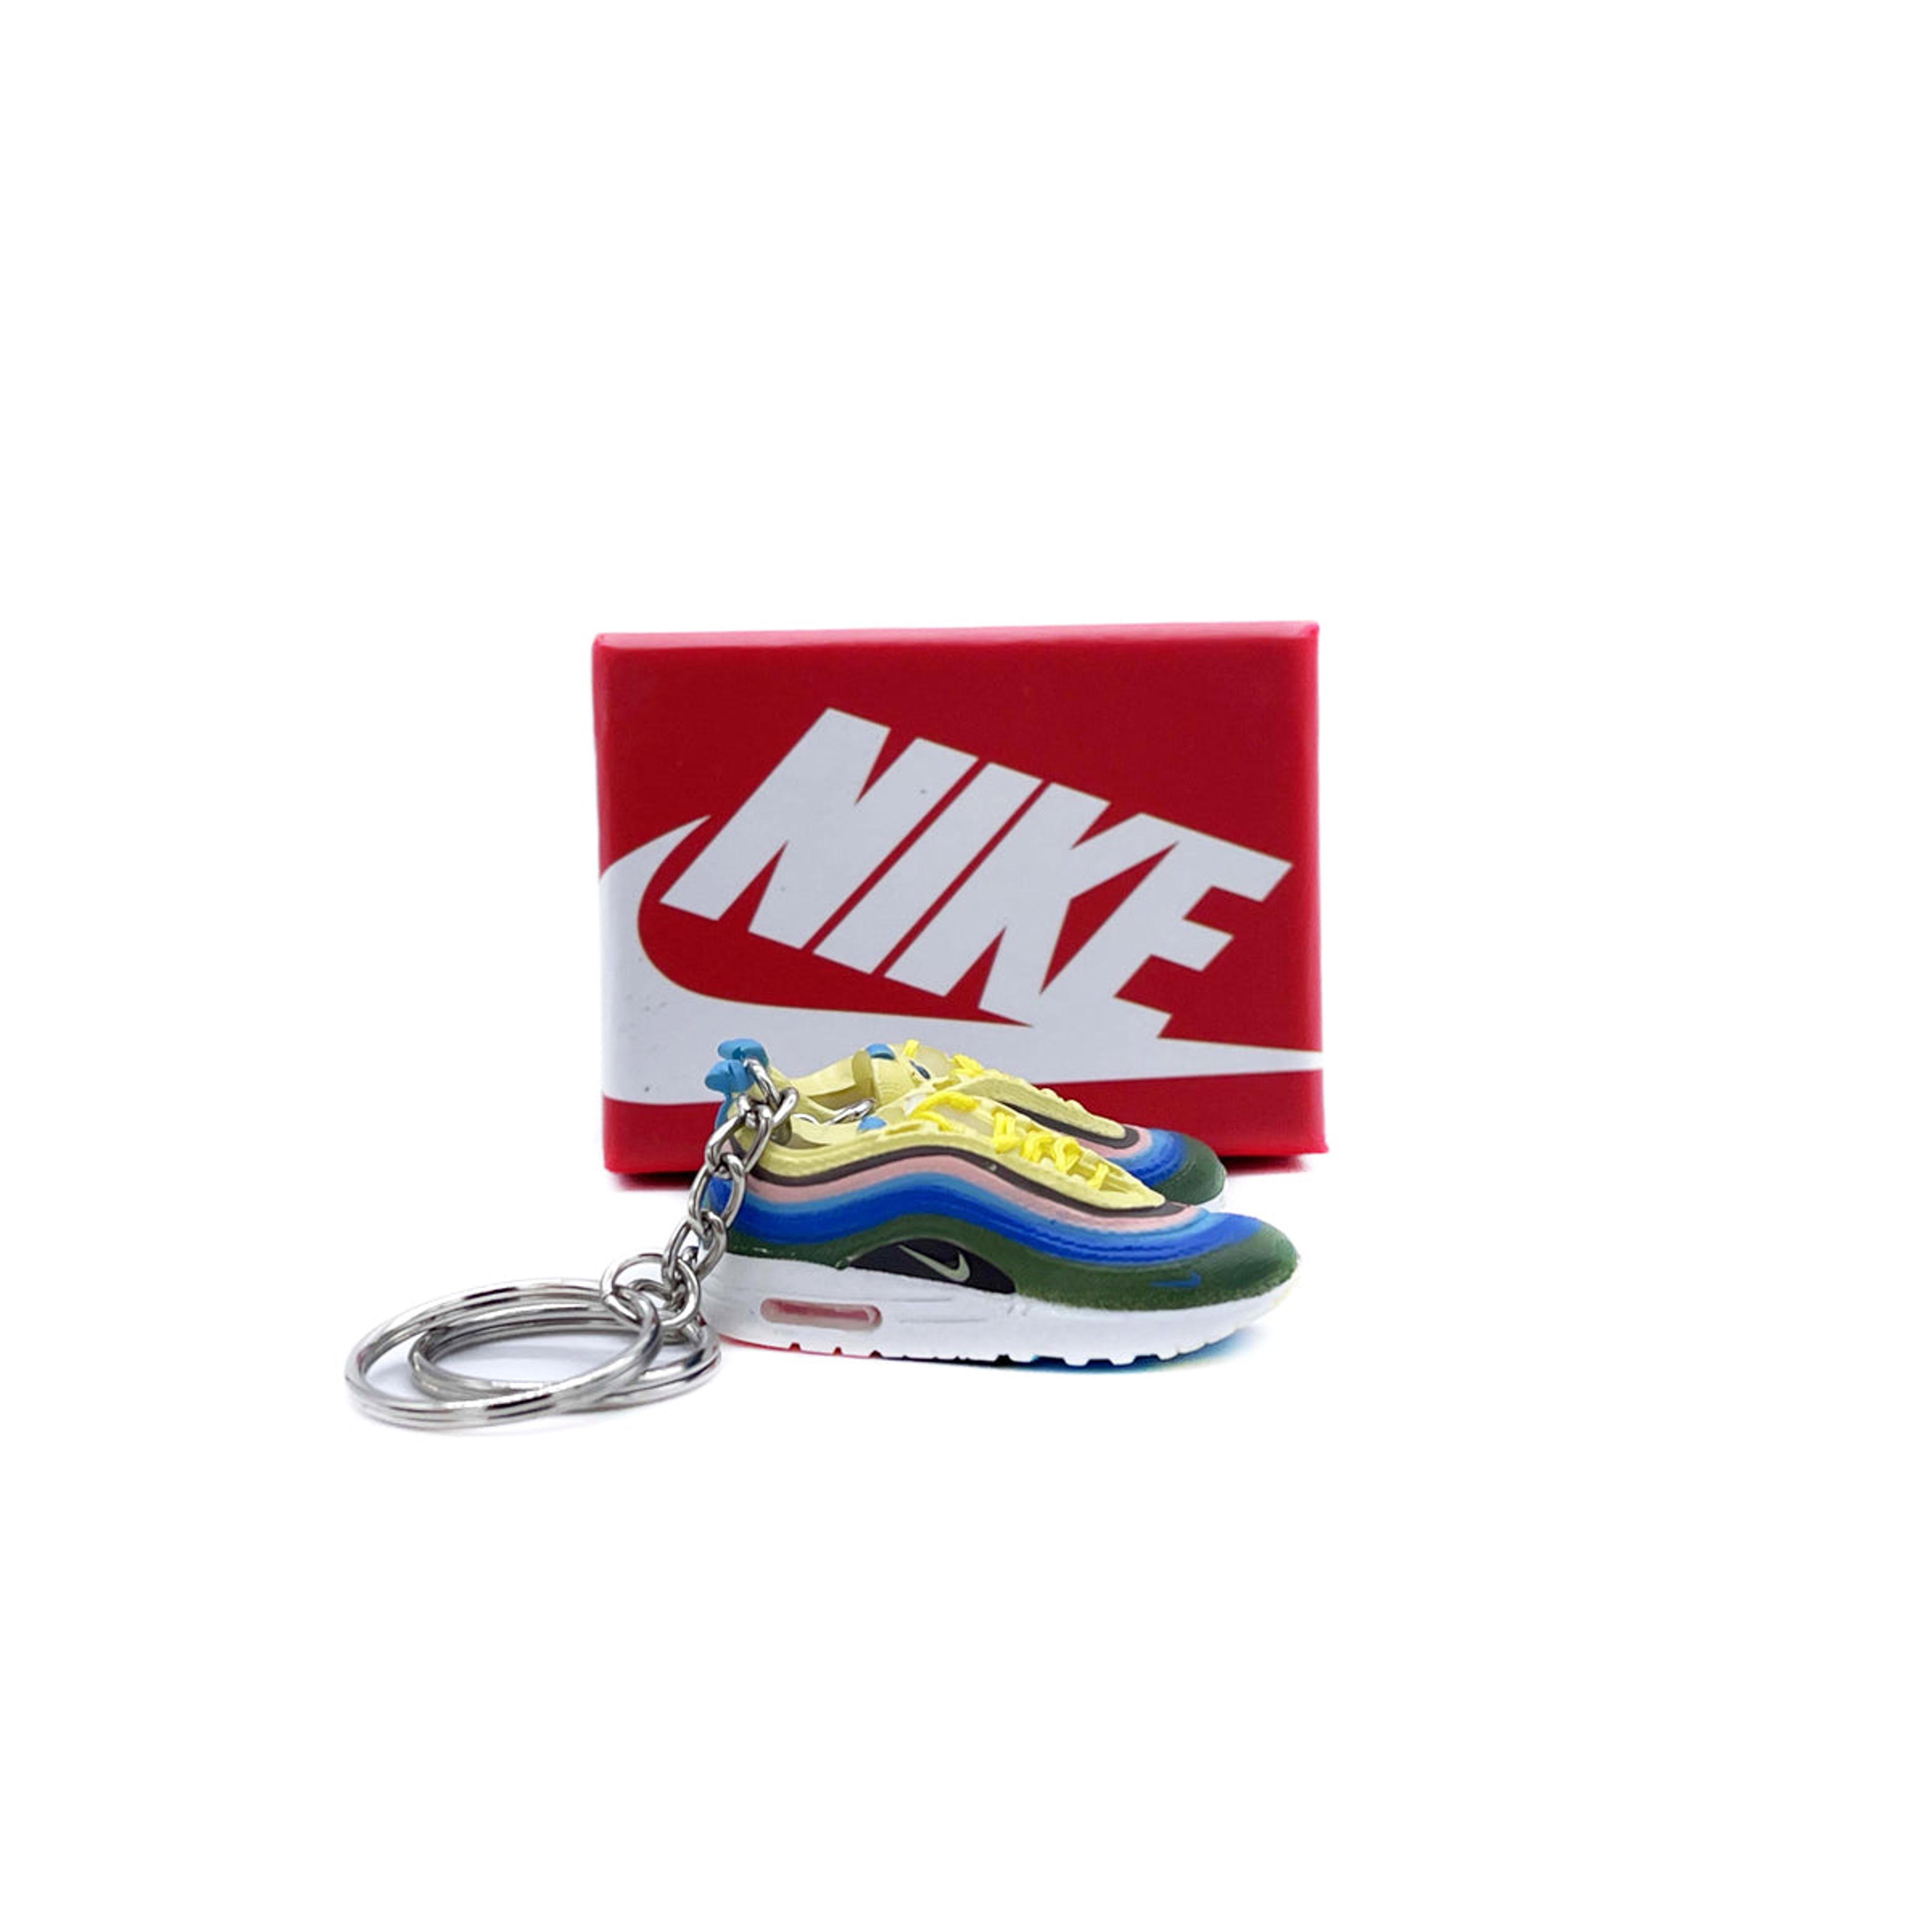 3D Sneaker Keychain- Air Max 97/1 Sean Wotherspoon Pair